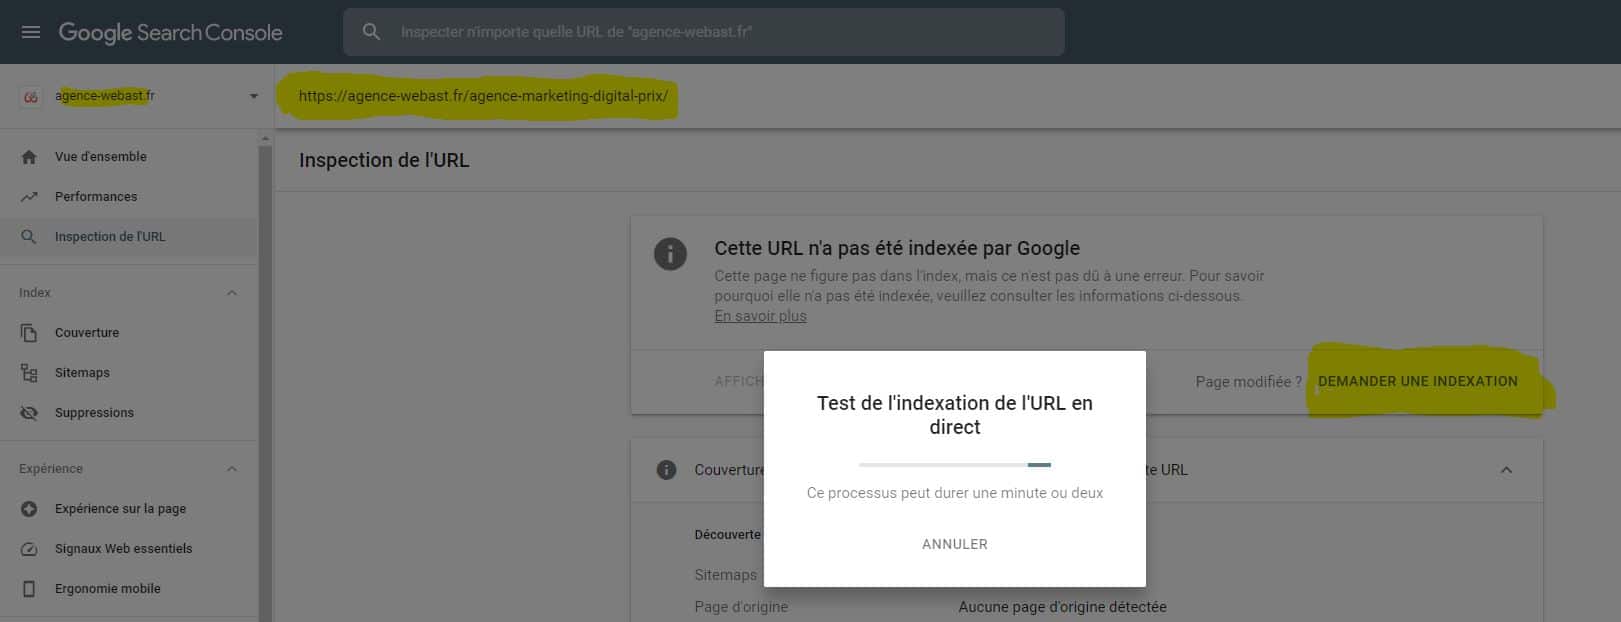 indexer site google exemple google search console